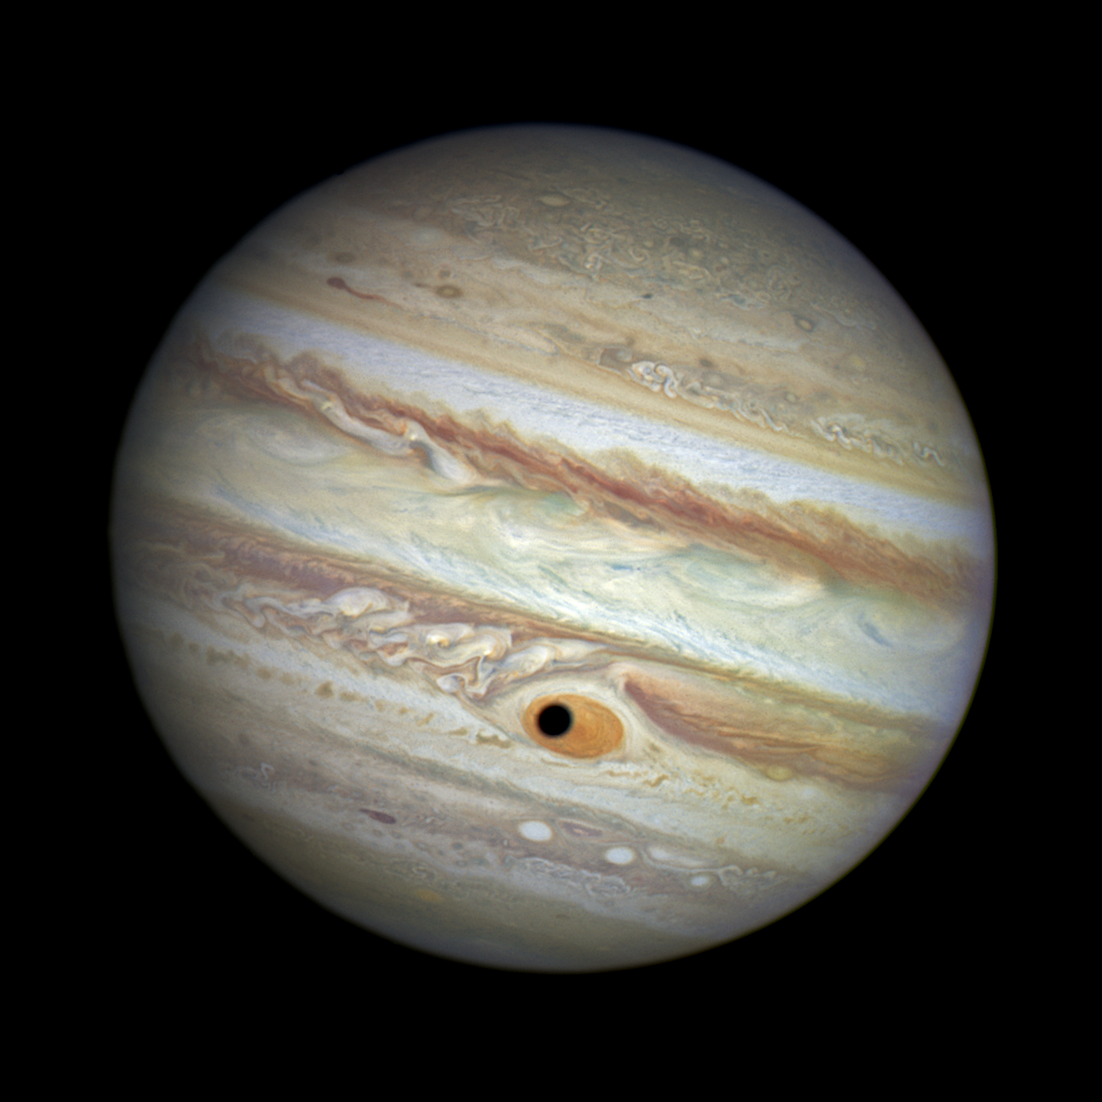 image of the planet Jupiter taken by the Hubble Space Telescope 